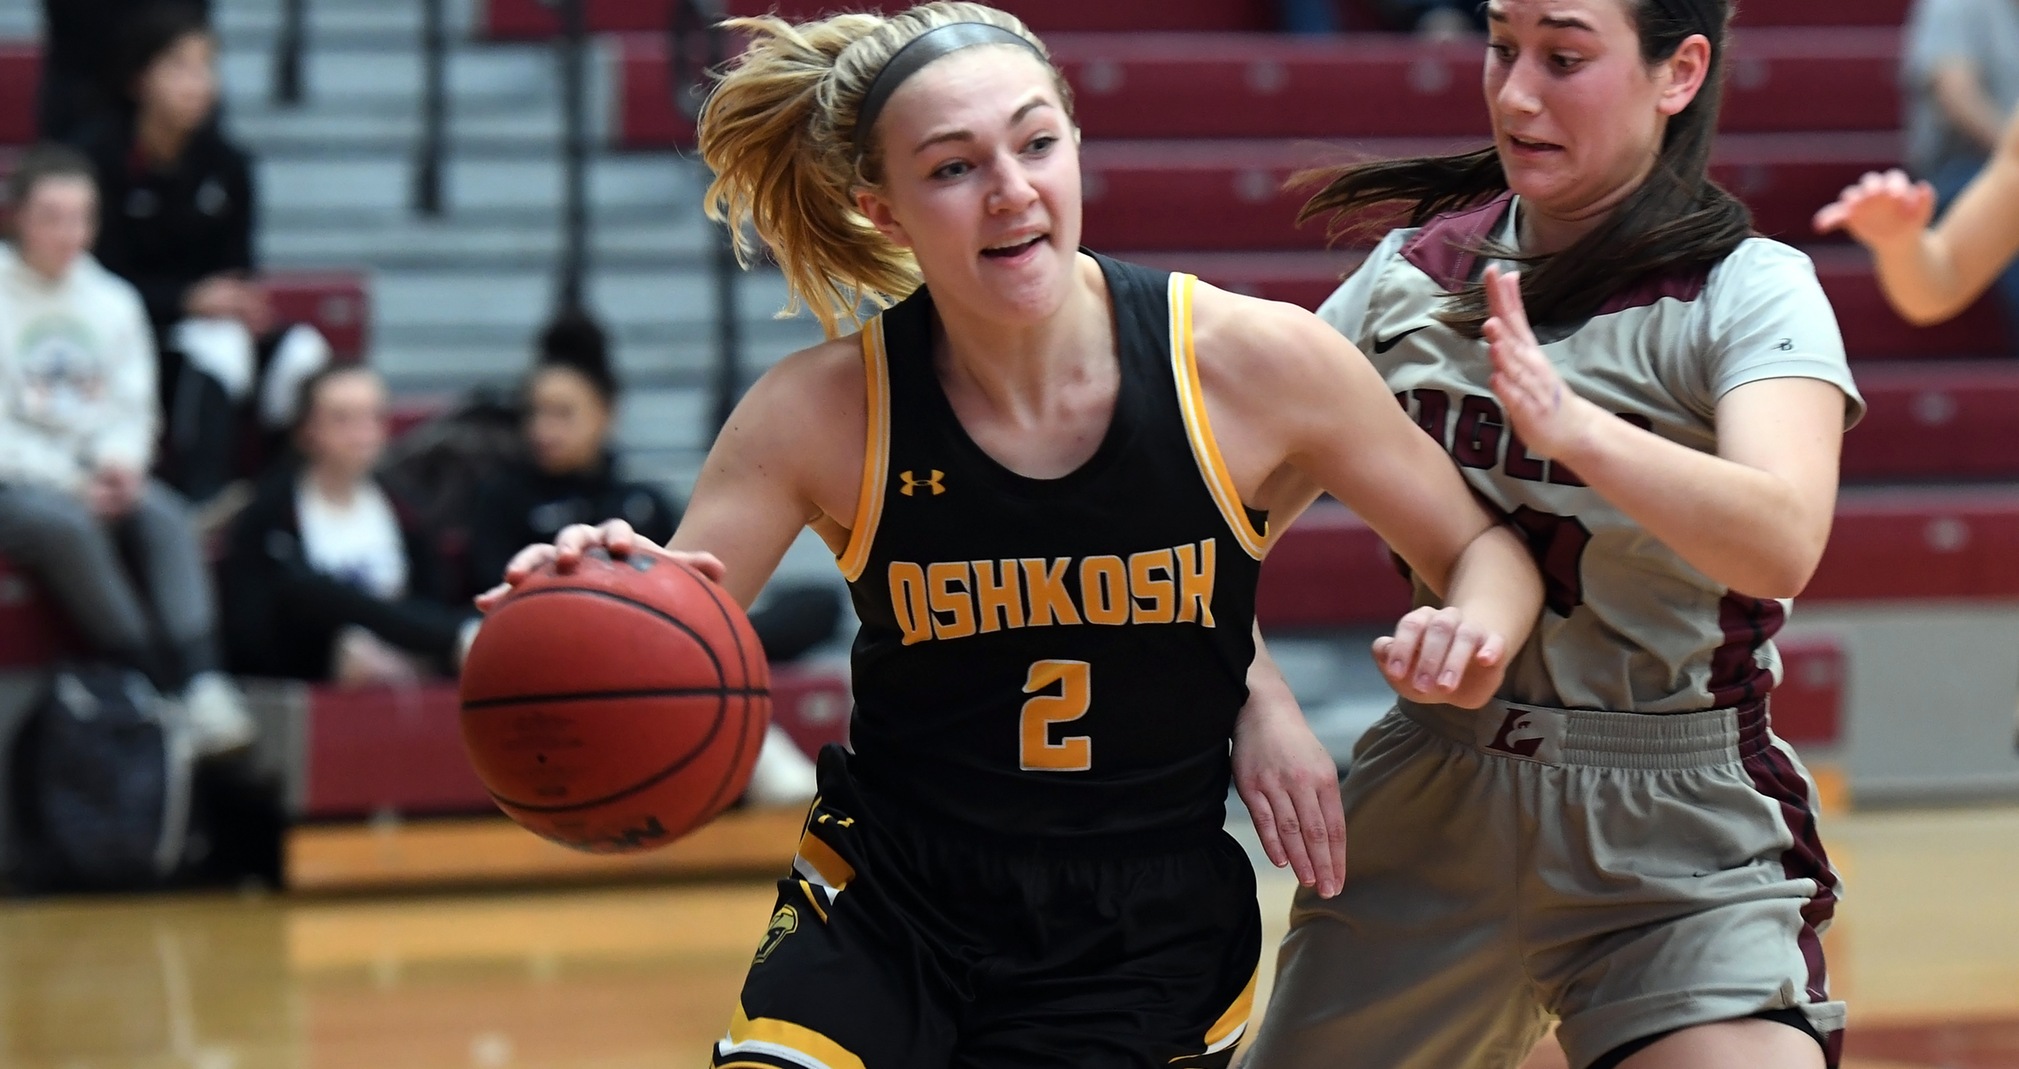 Abby Kaiser had seven points, five rebounds, two assists and two steals against the Eagles.